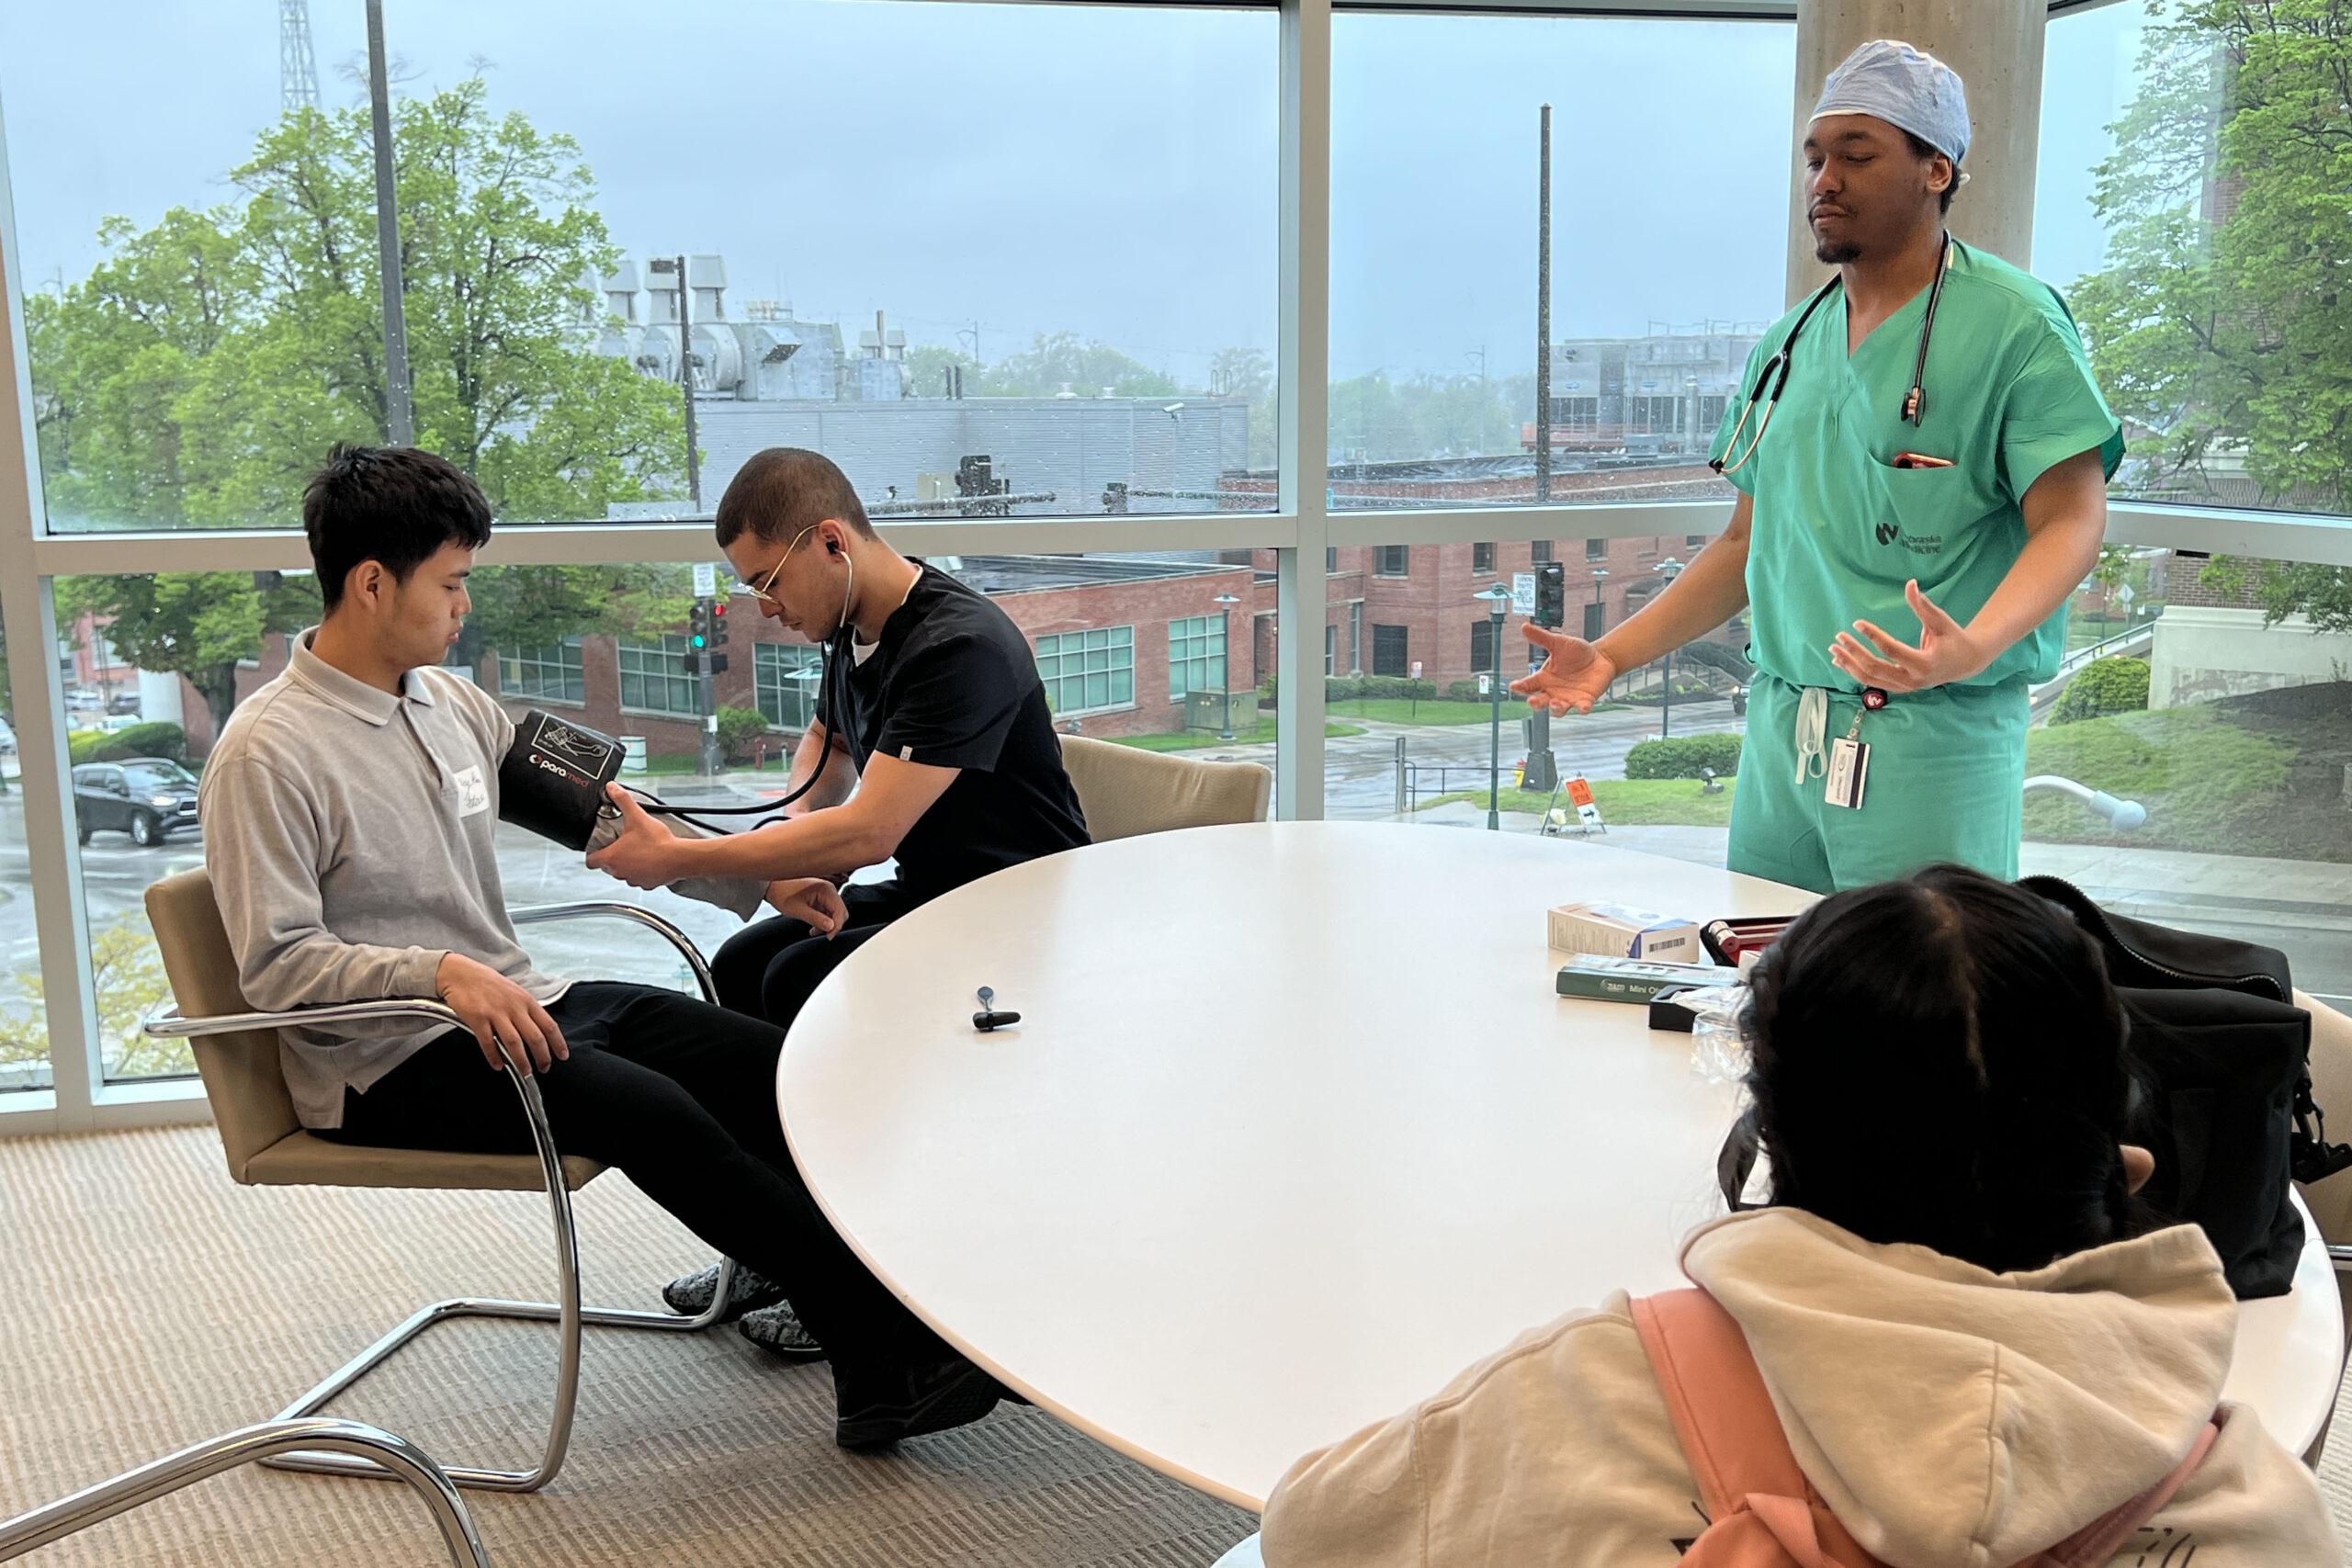 Medical students Mark Carter&comma; MD&comma; in black&comma; and Austen Washington&comma; in green&comma; discuss medical exams with Benson High School students&period;